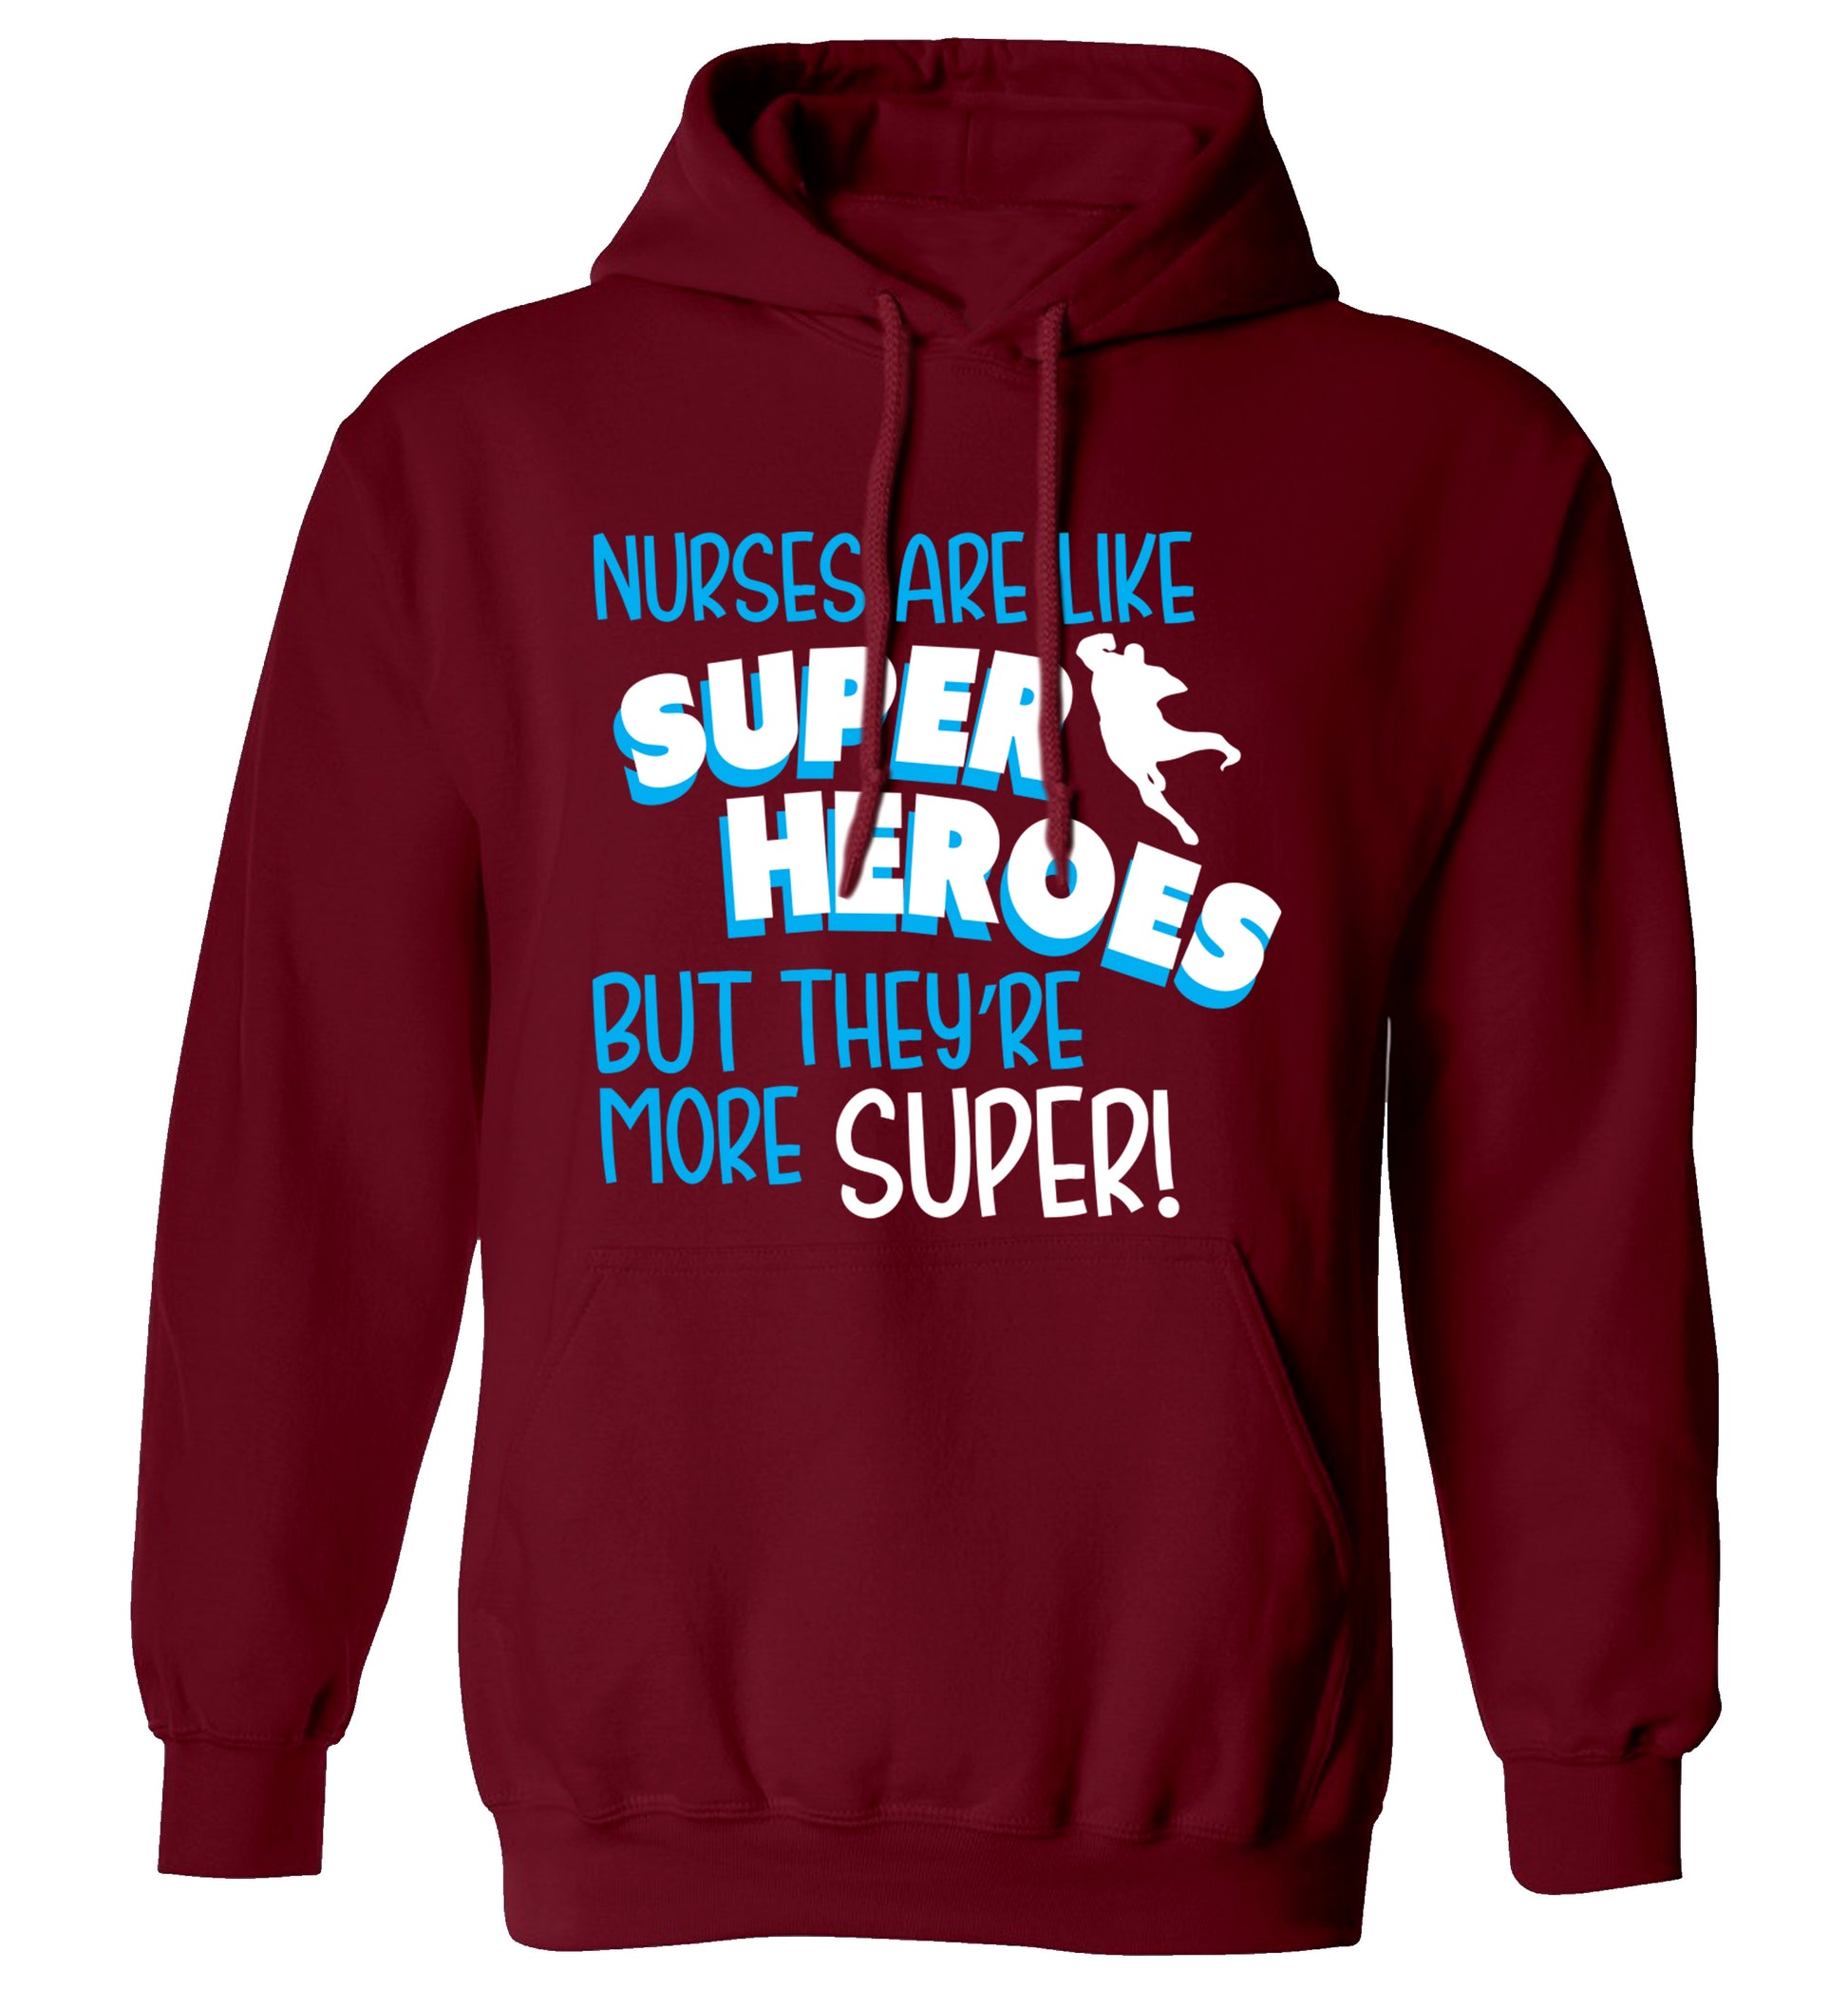 Nurses are like superheros but they're more super adults unisex maroon hoodie 2XL